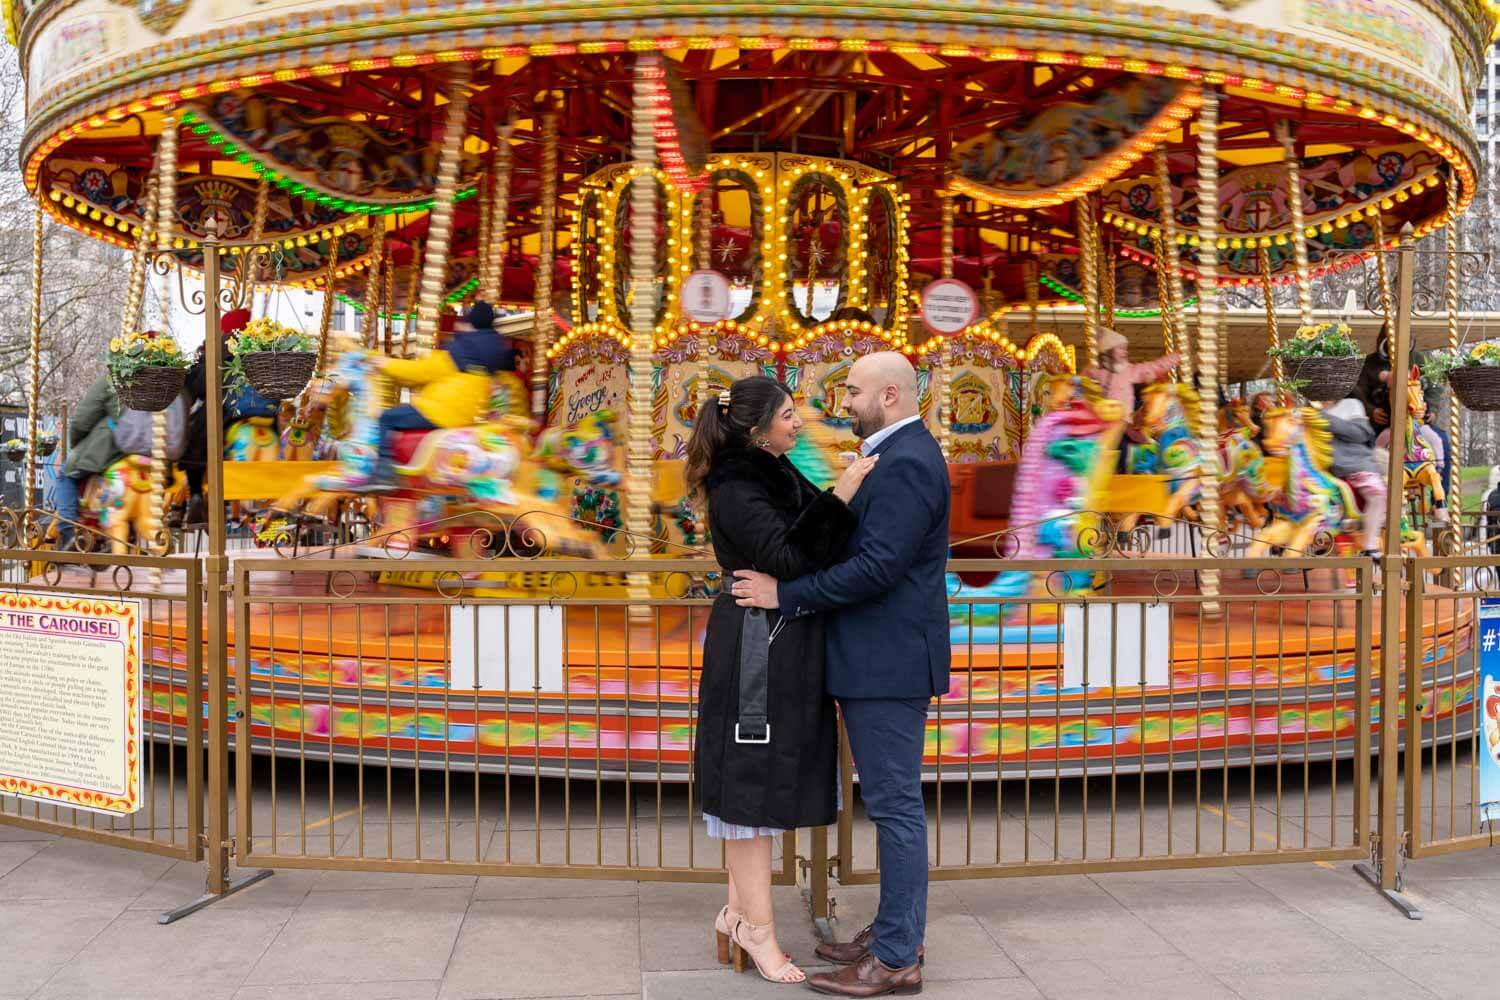 couple embrace in front of a moving fairground carousel